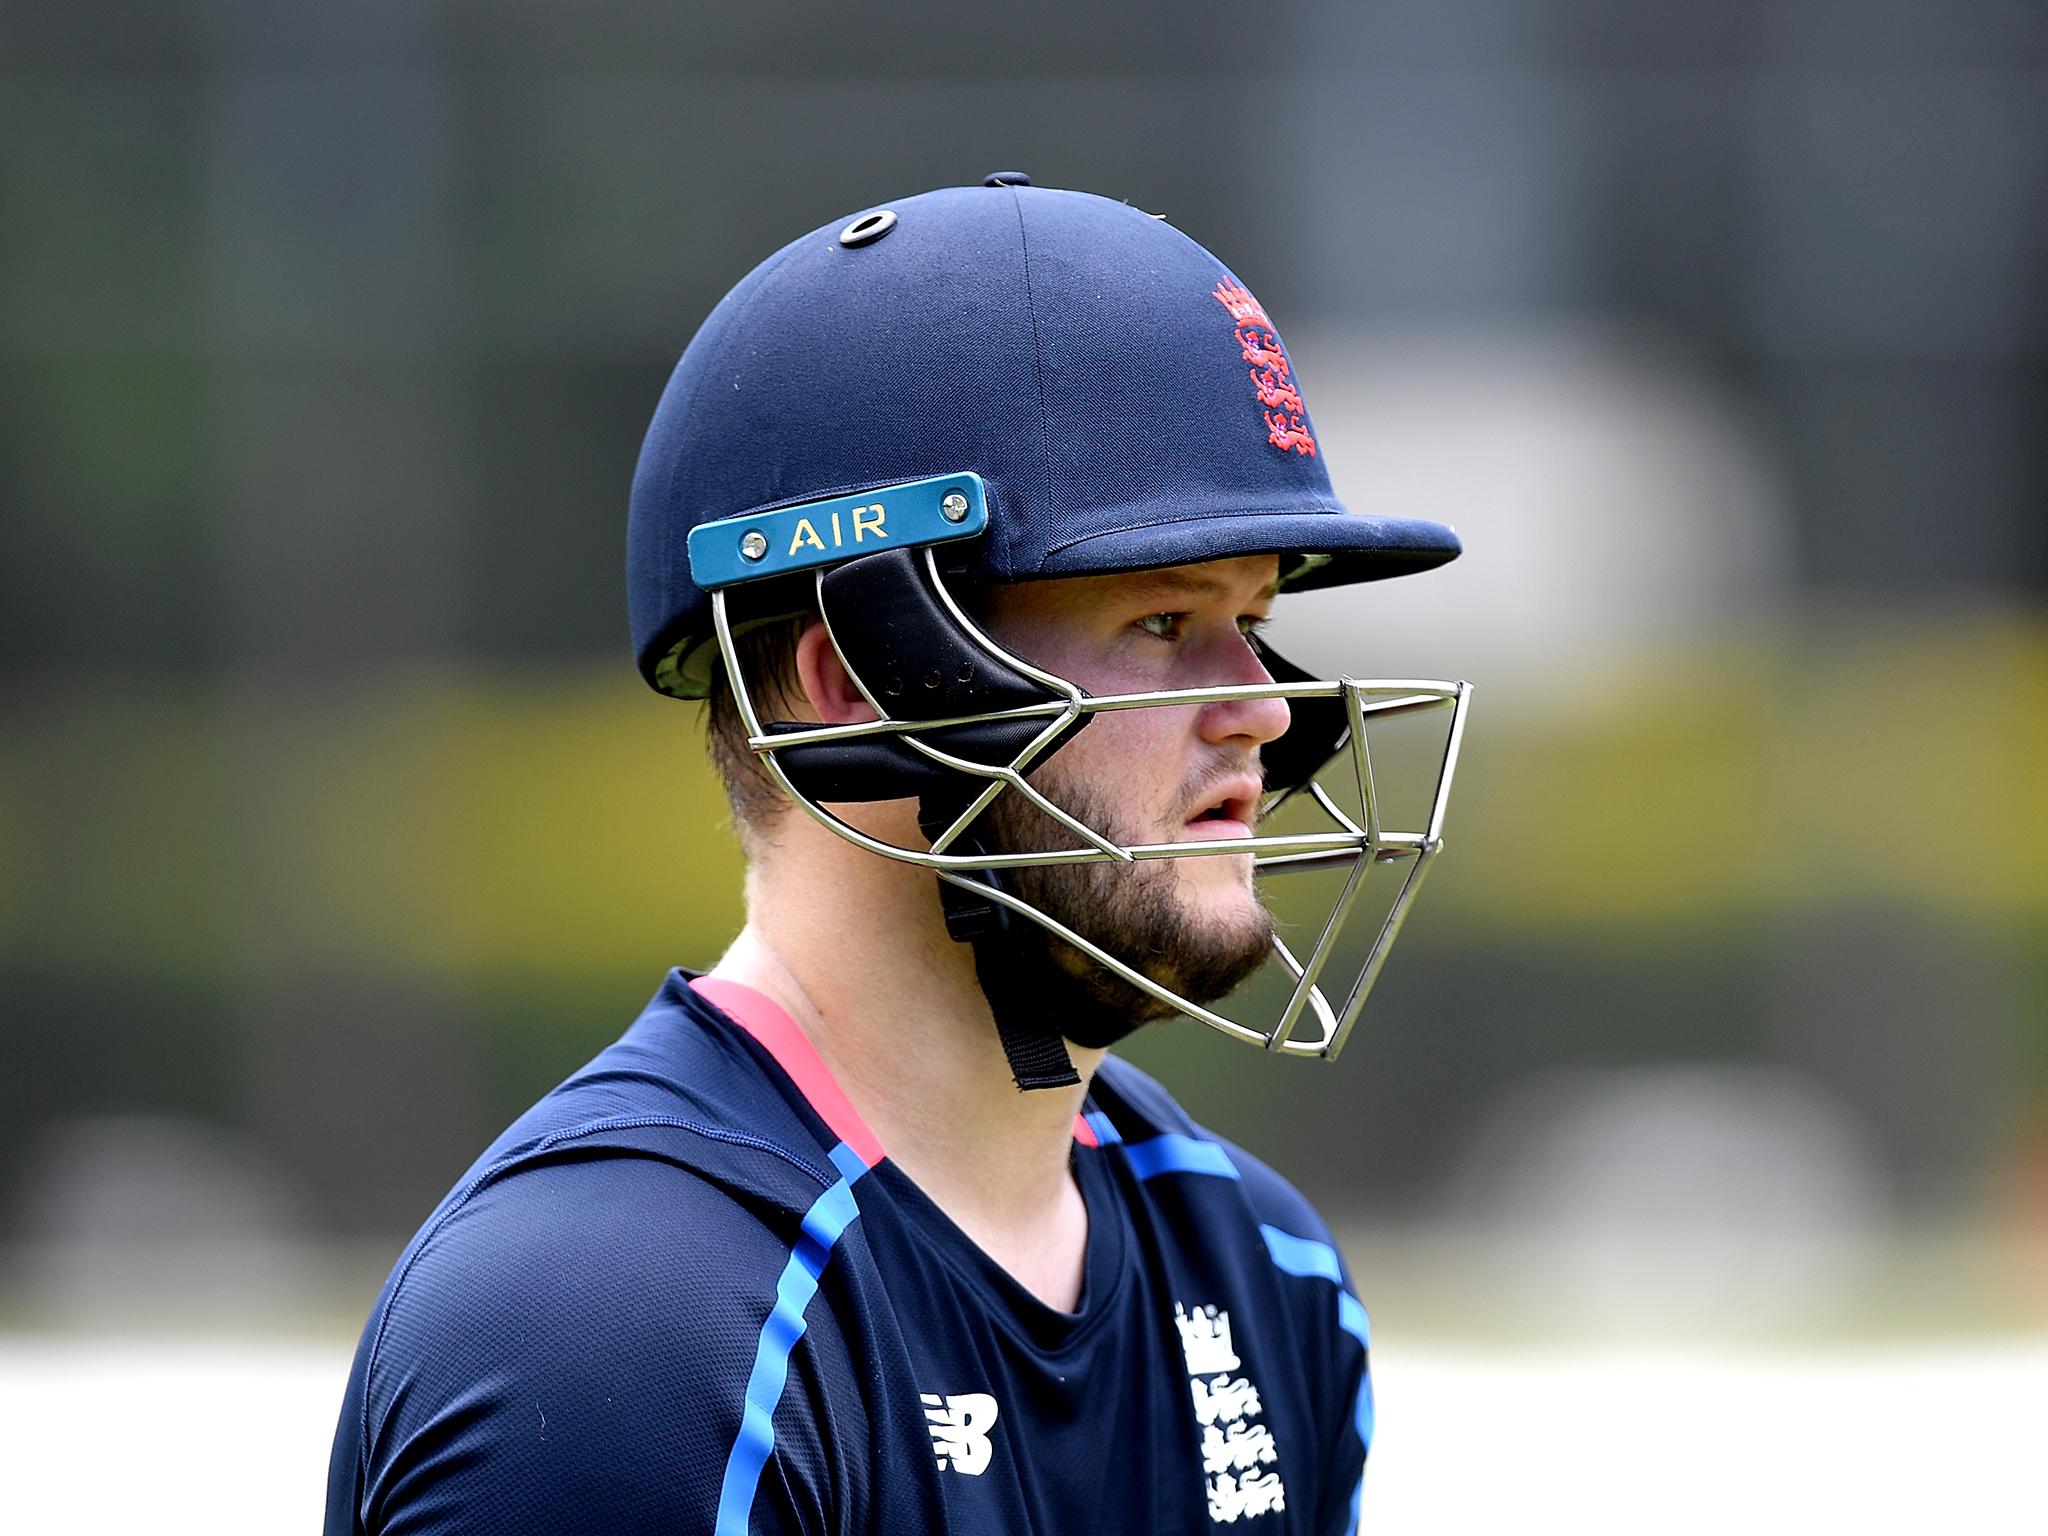 Ben Duckett has been suspended by the ECB after an incident in a Perth bar on Thursday